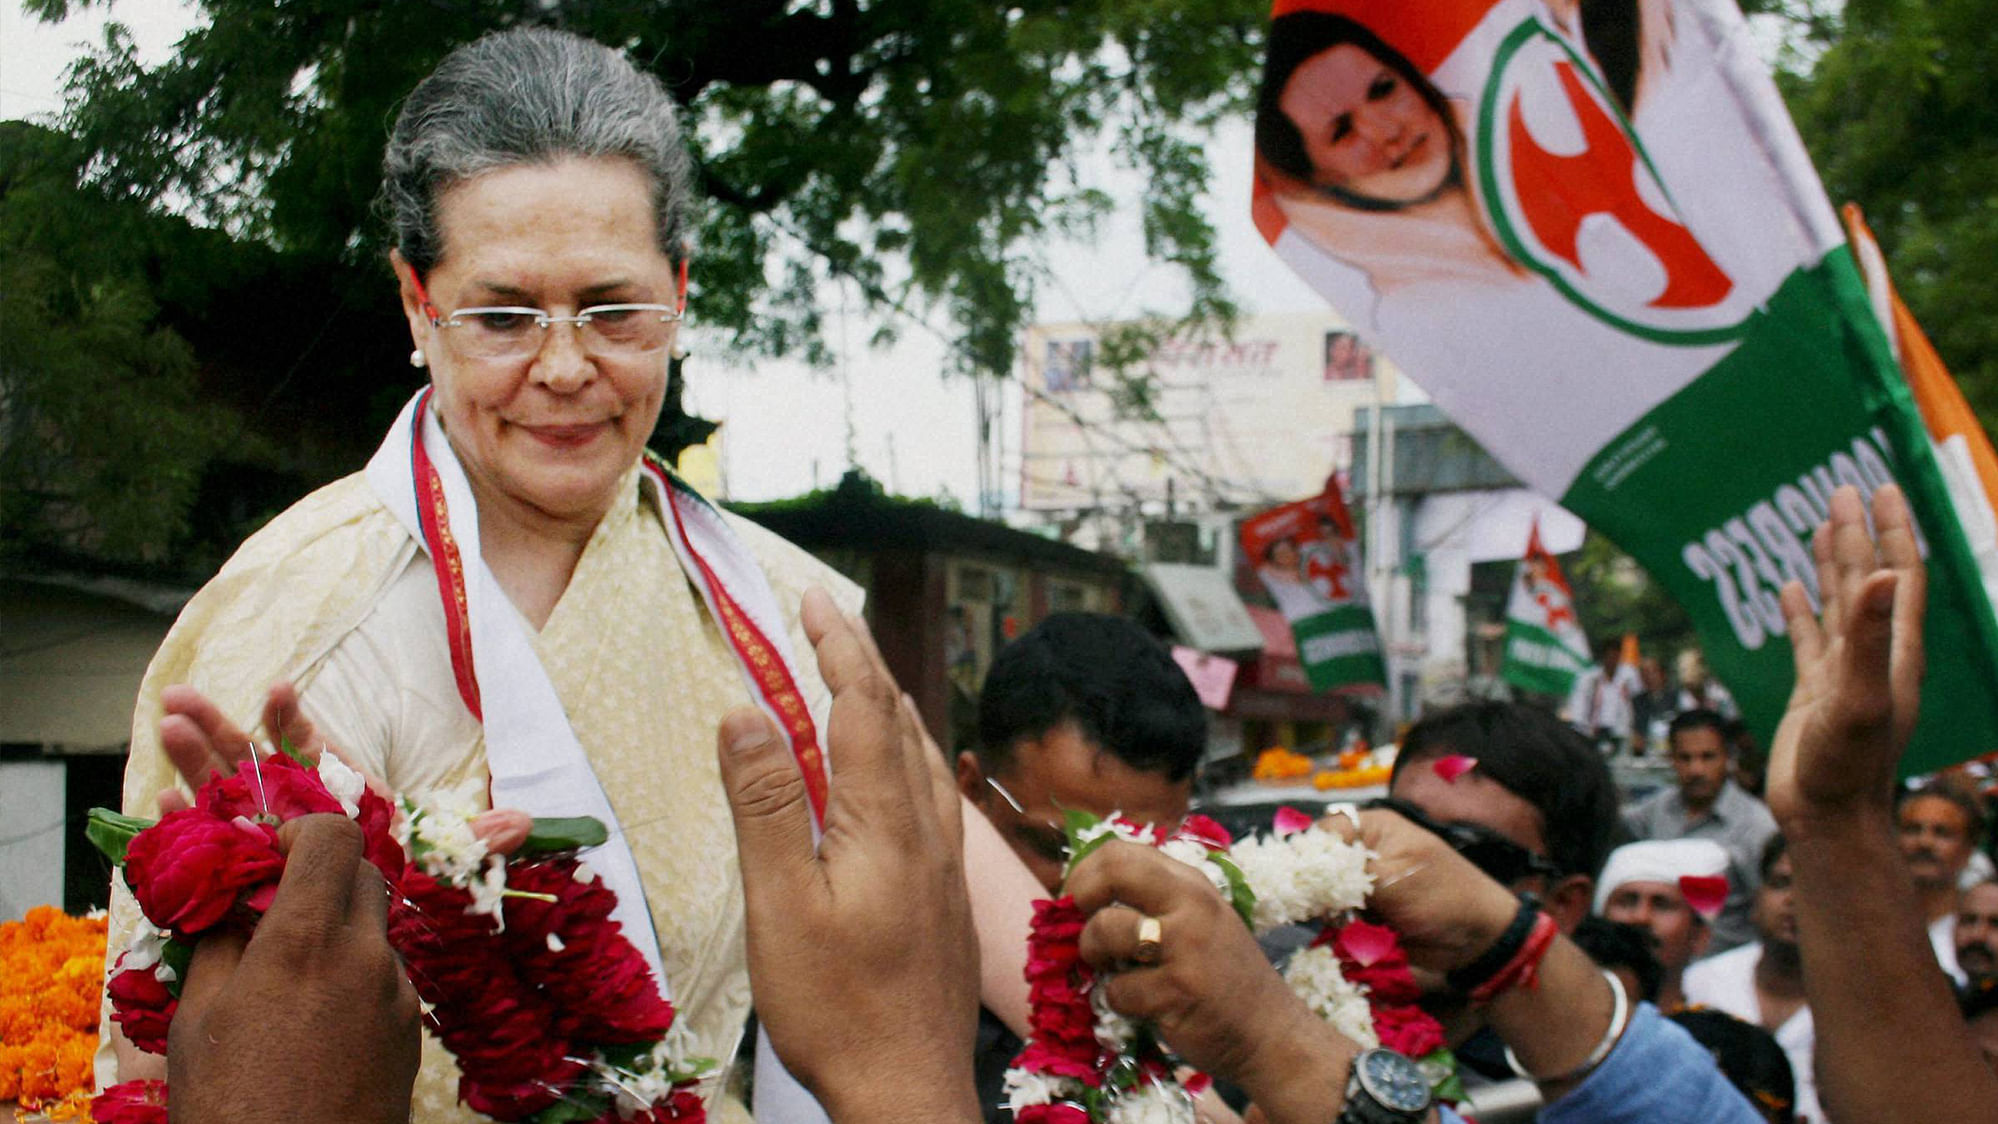 Congress Party President Sonia Gandhi receiving garlands during a road show before she fell ill in Varanasi in August 2016.